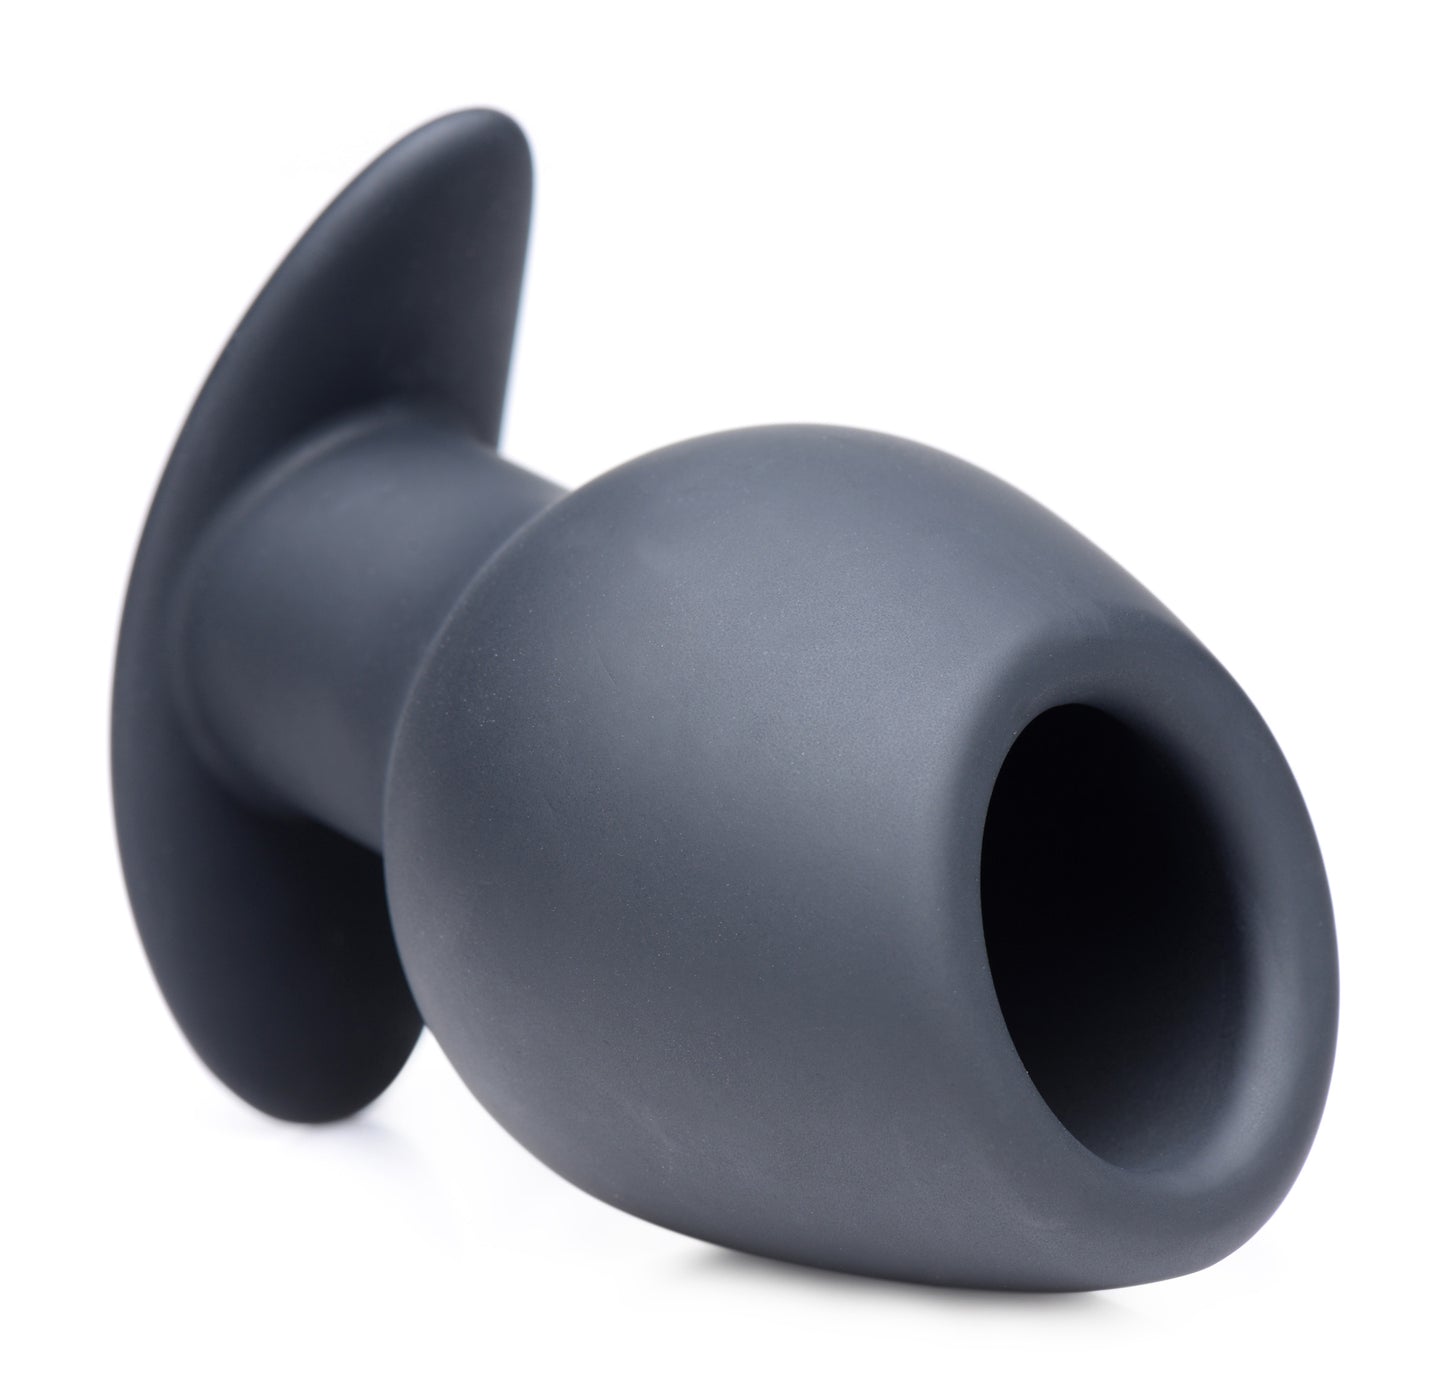 Ass Goblet Silicone Hollow Anal Plug - Small - UABDSM